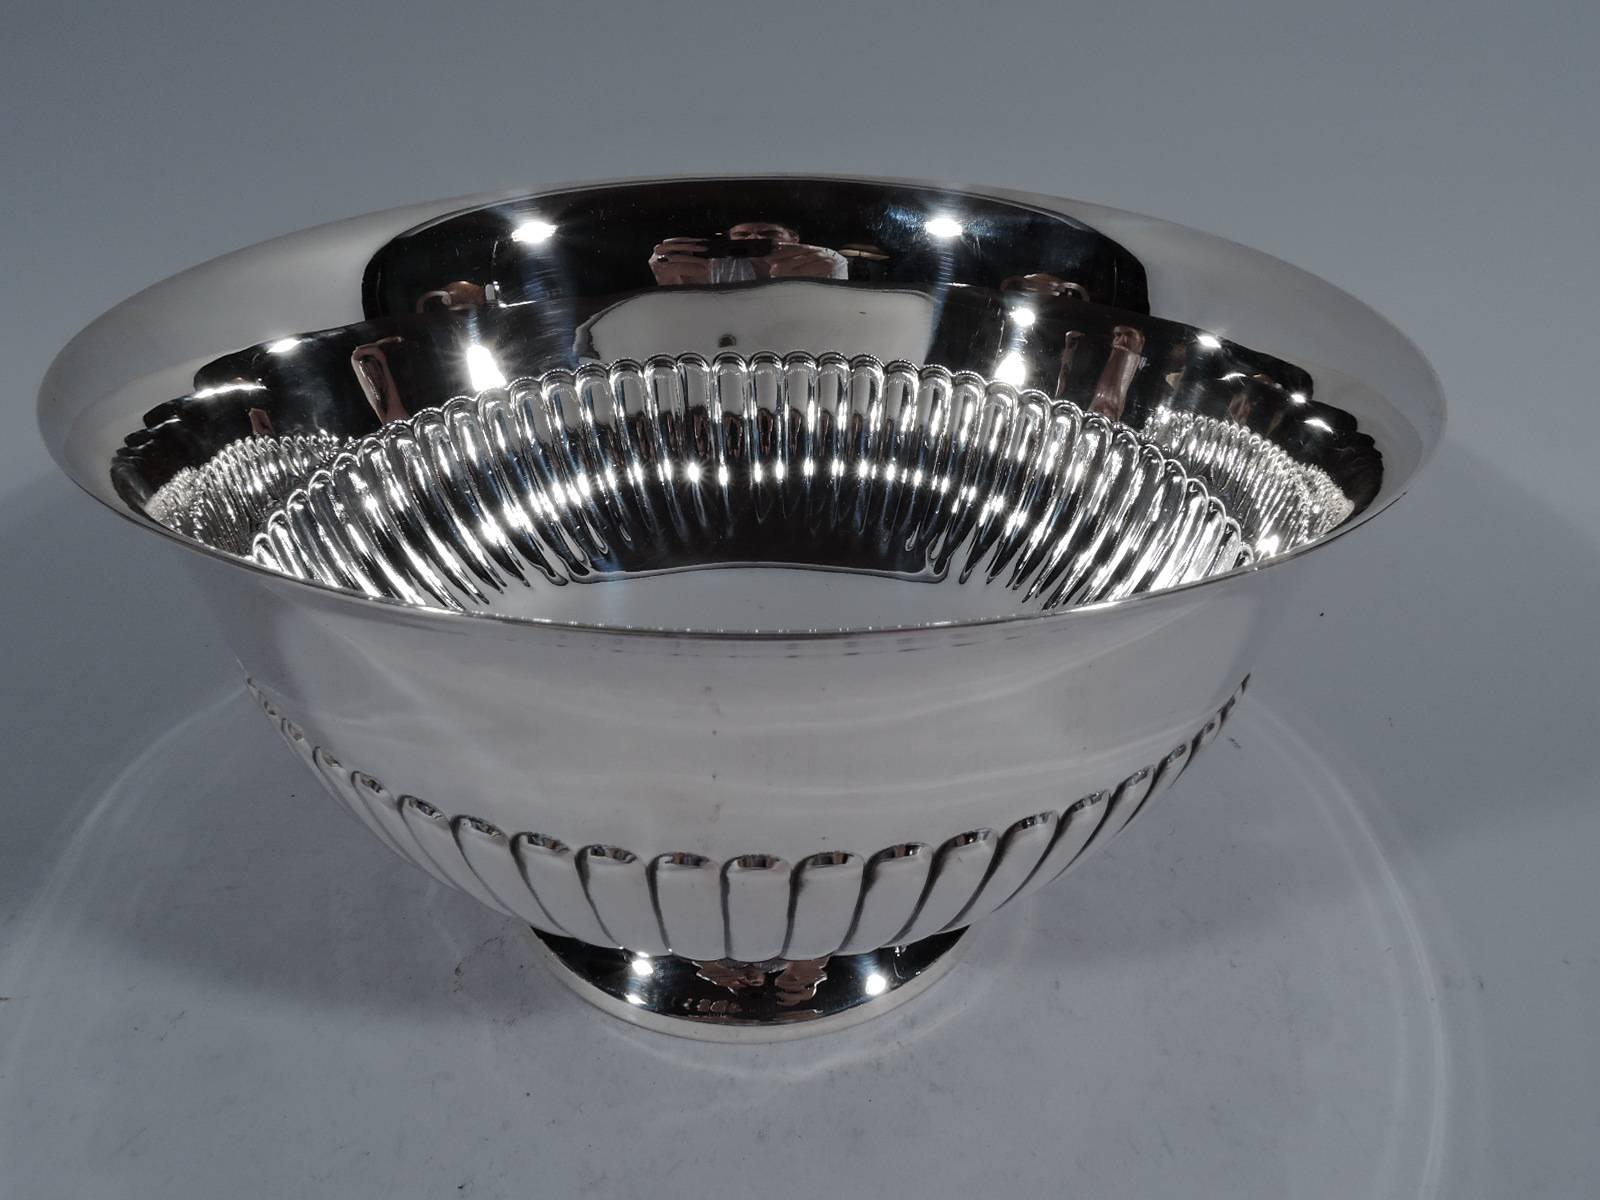 Classical sterling silver footed bowl. Made by Cartier in New York, circa 1940. Curved sides with flared rim and half gadrooning. Rests on stepped foot. Hallmark includes no. 232. Weight: 24.8 troy ounces.